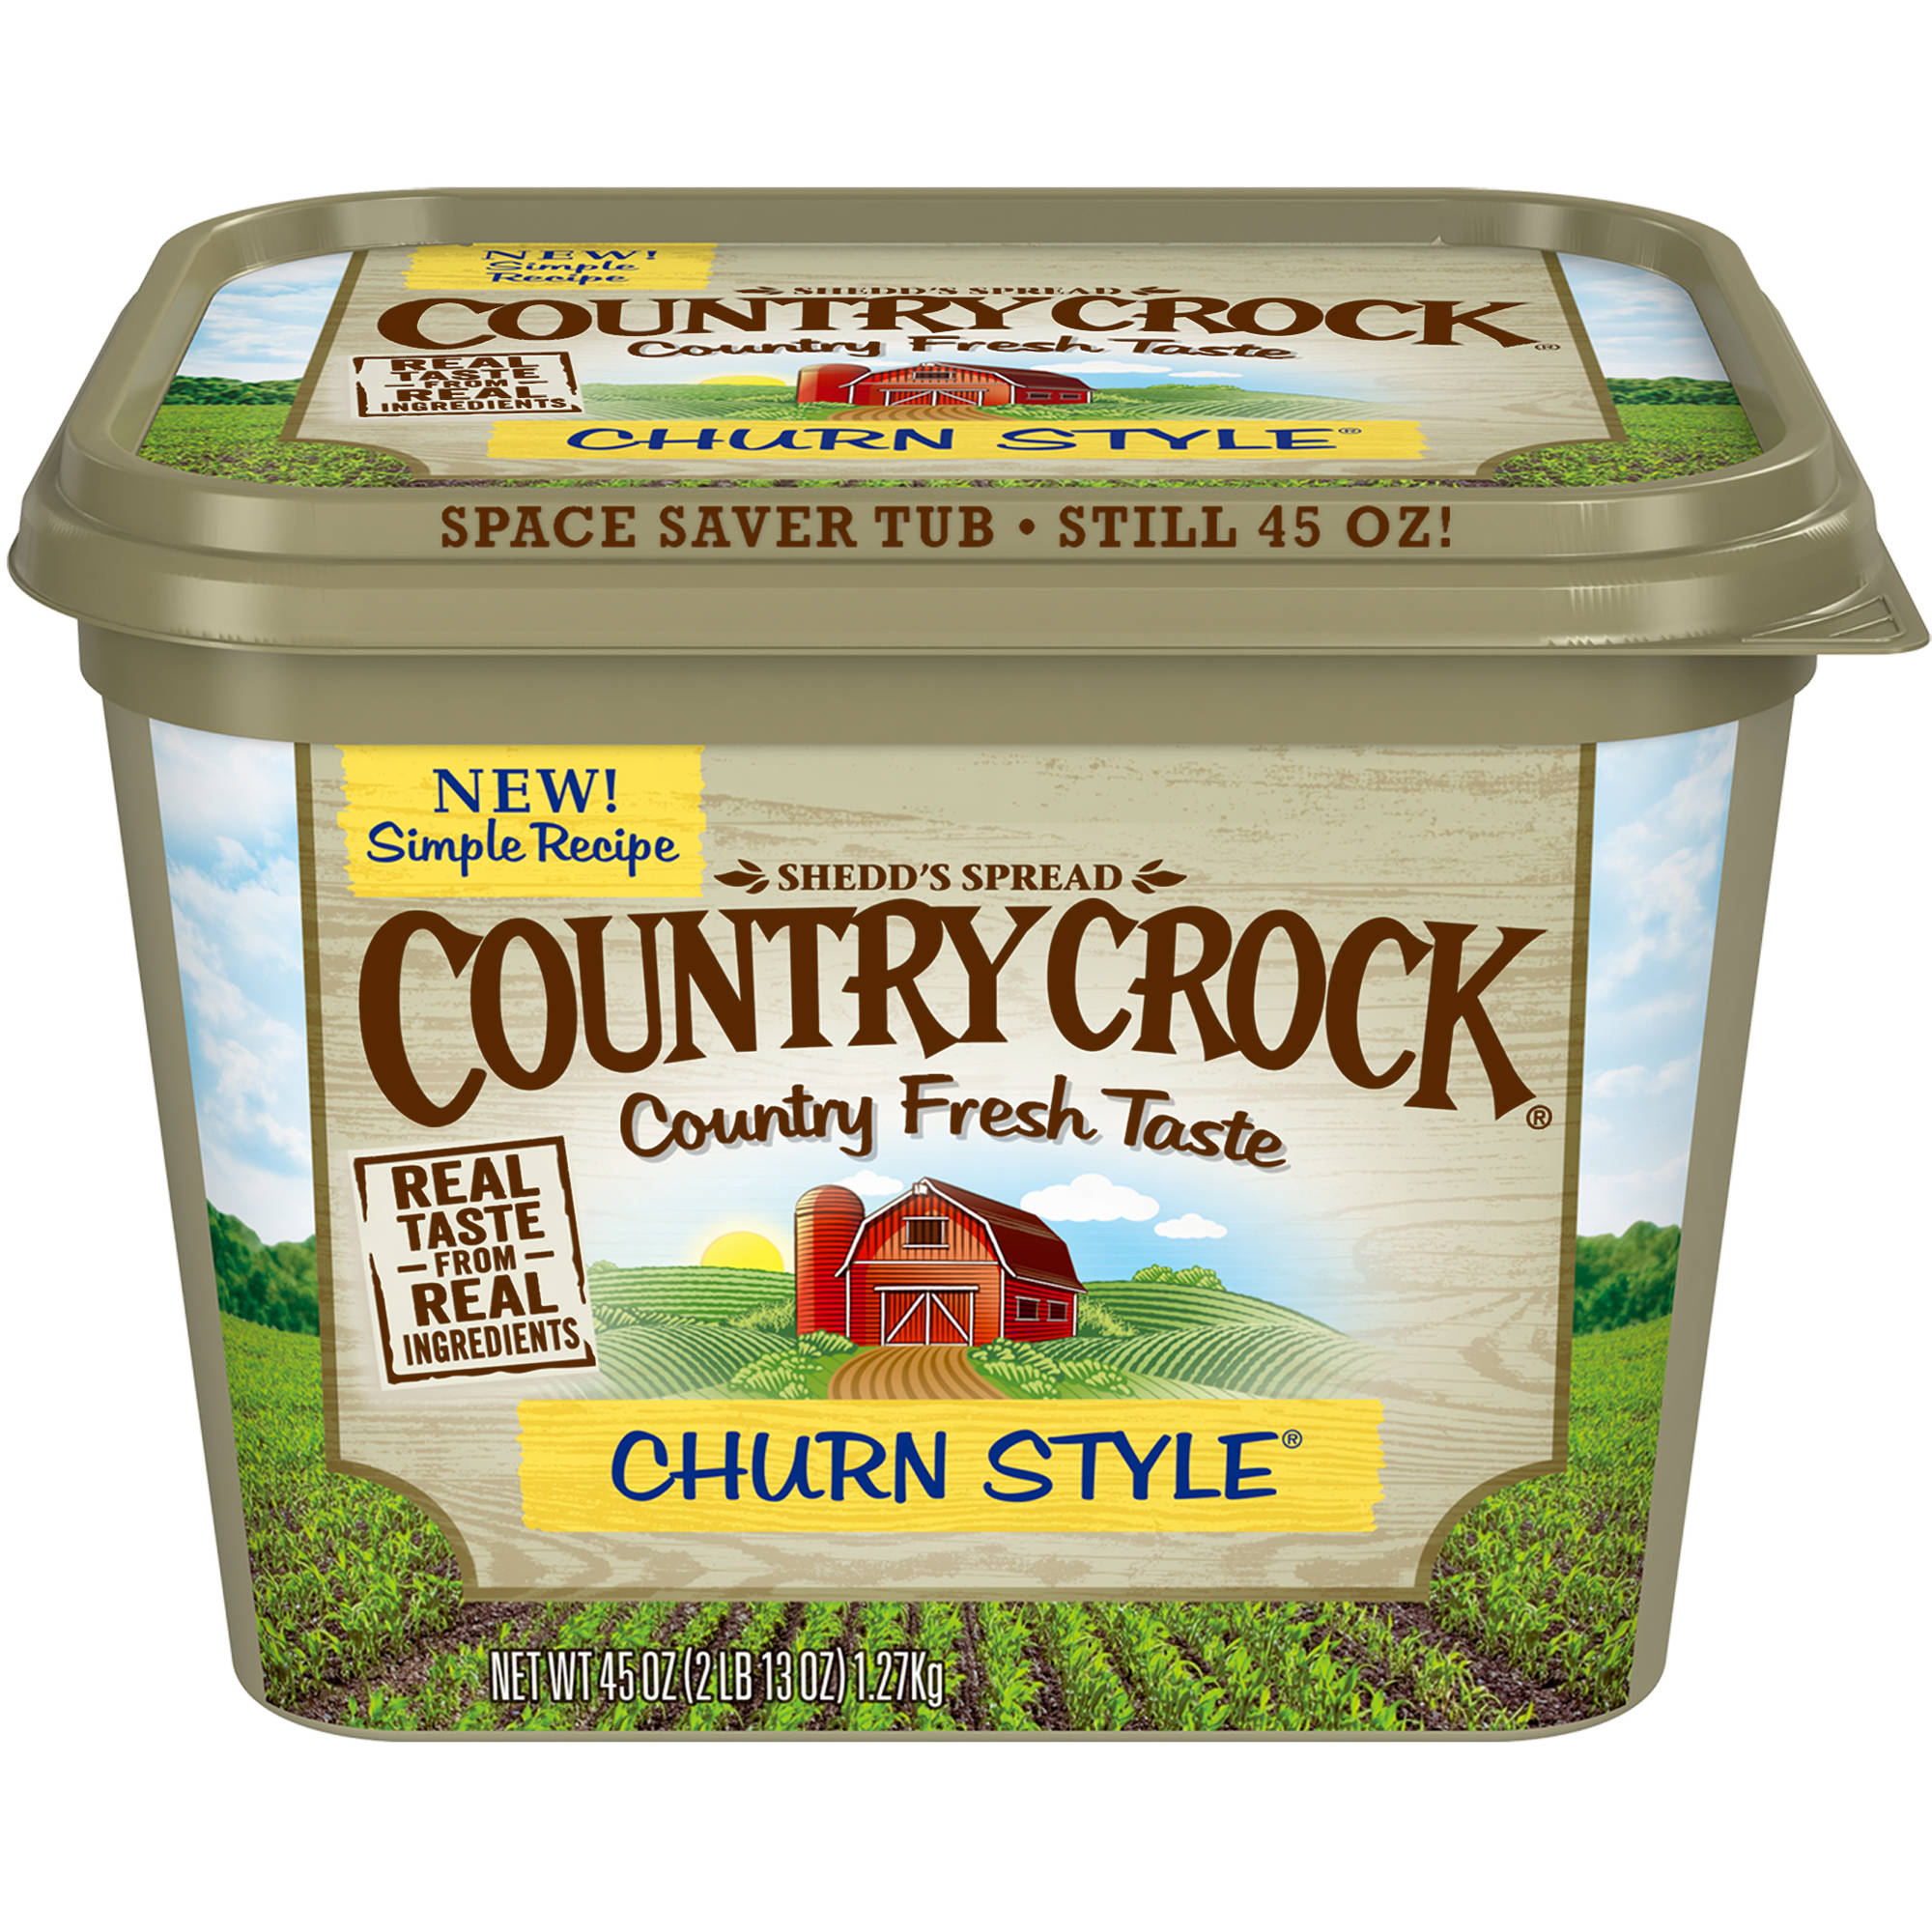 New Country Crock Coupon! Save $1!